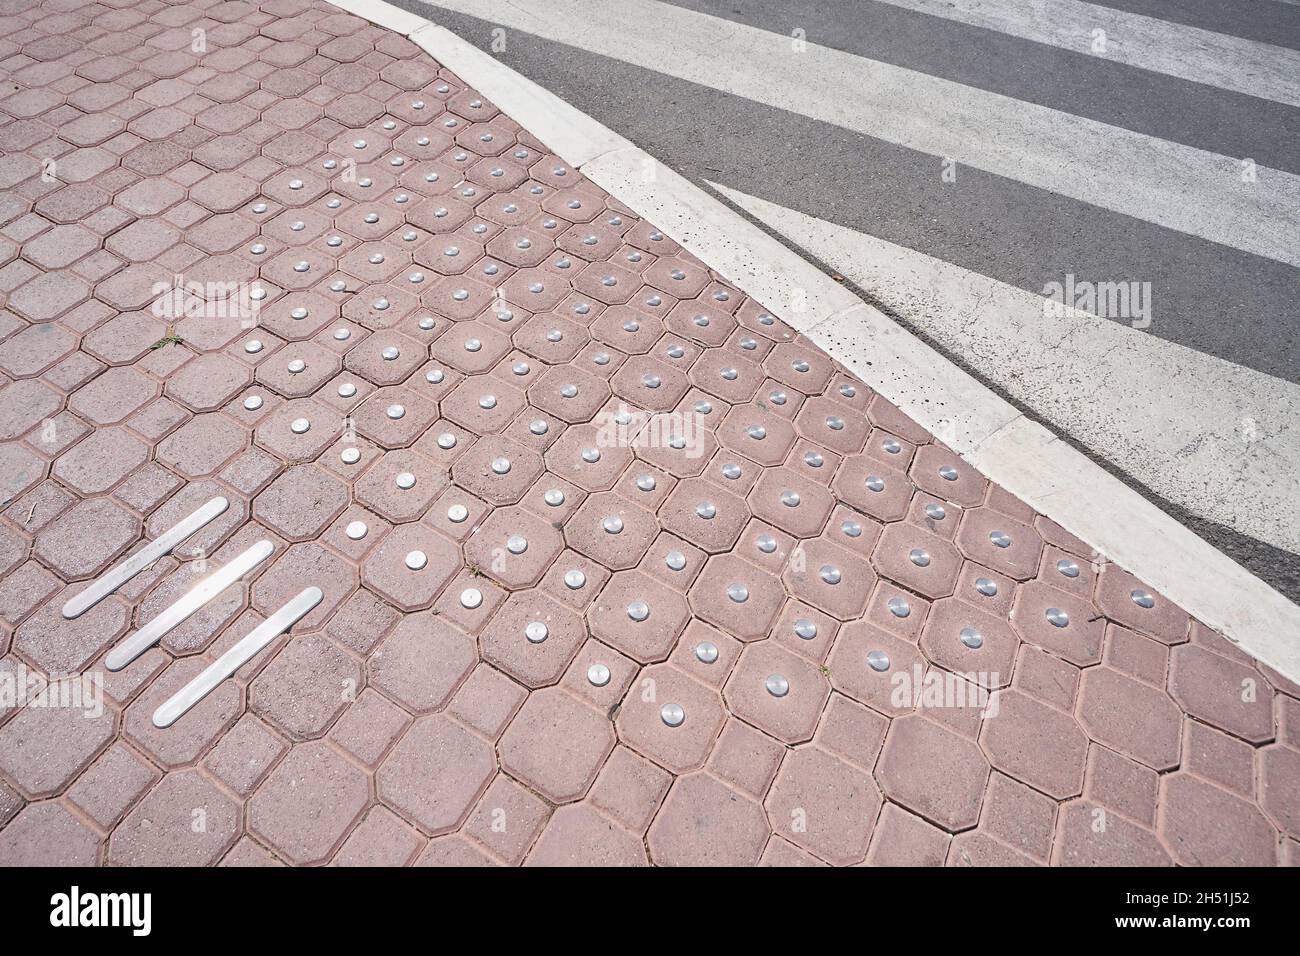 Paving slabs with anti-slip metal inserts for a crosswalk road. Stock Photo